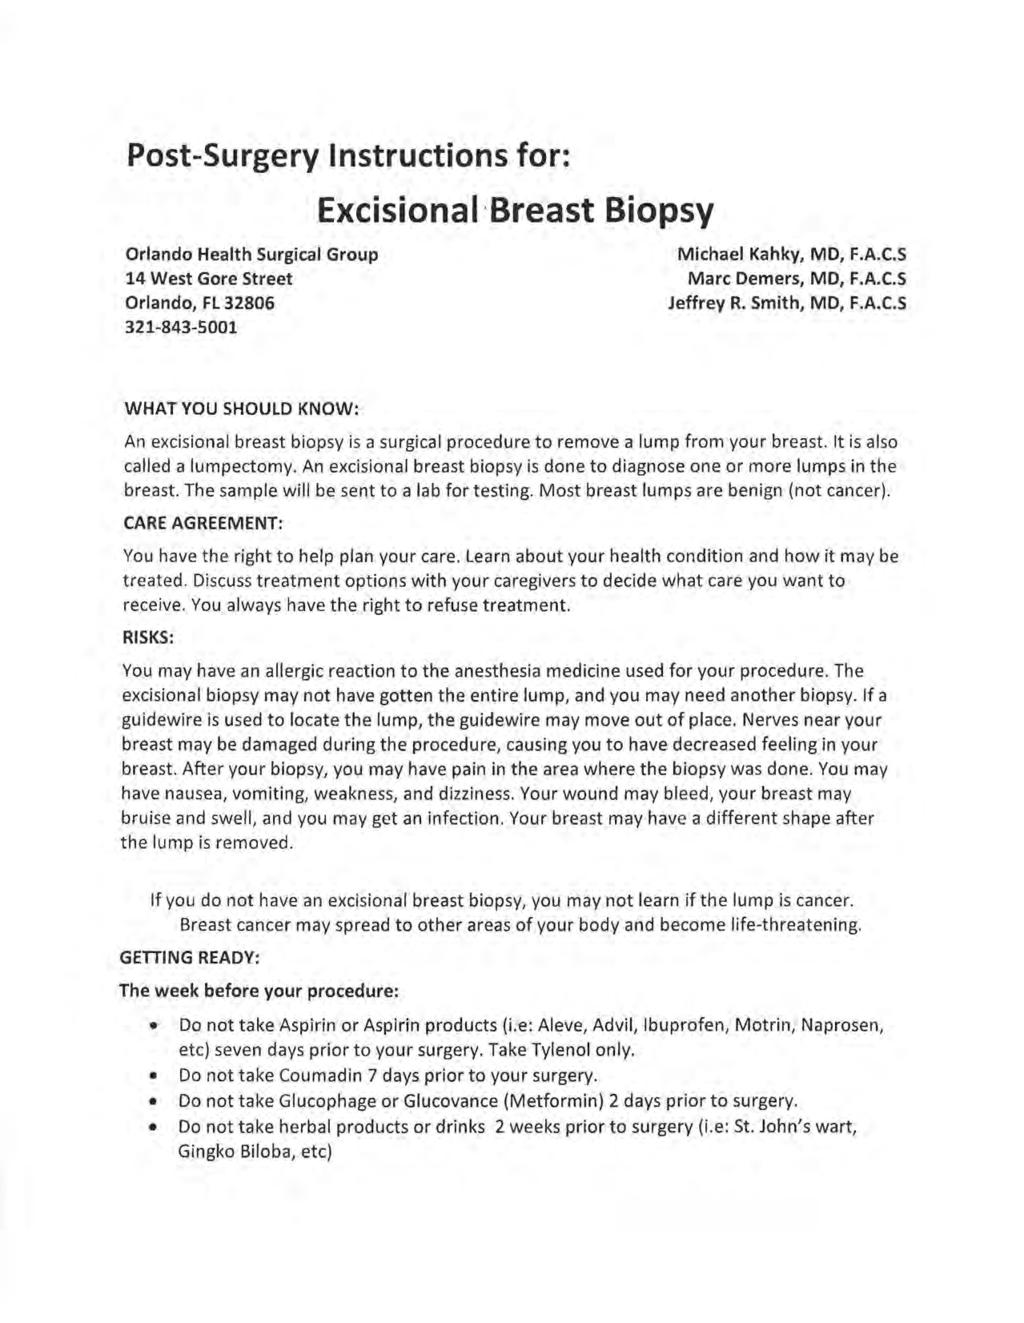 Post-Surgery Instructions for: Excisiona I Breast Biopsy Orlando Health Surgical Group 14 West Gore Street Orlando, FL 32806 321-843-5001 Michael Kahky, MD, F.A.C.S Marc Demers, MD, F.A.C.S Jeffrey R.